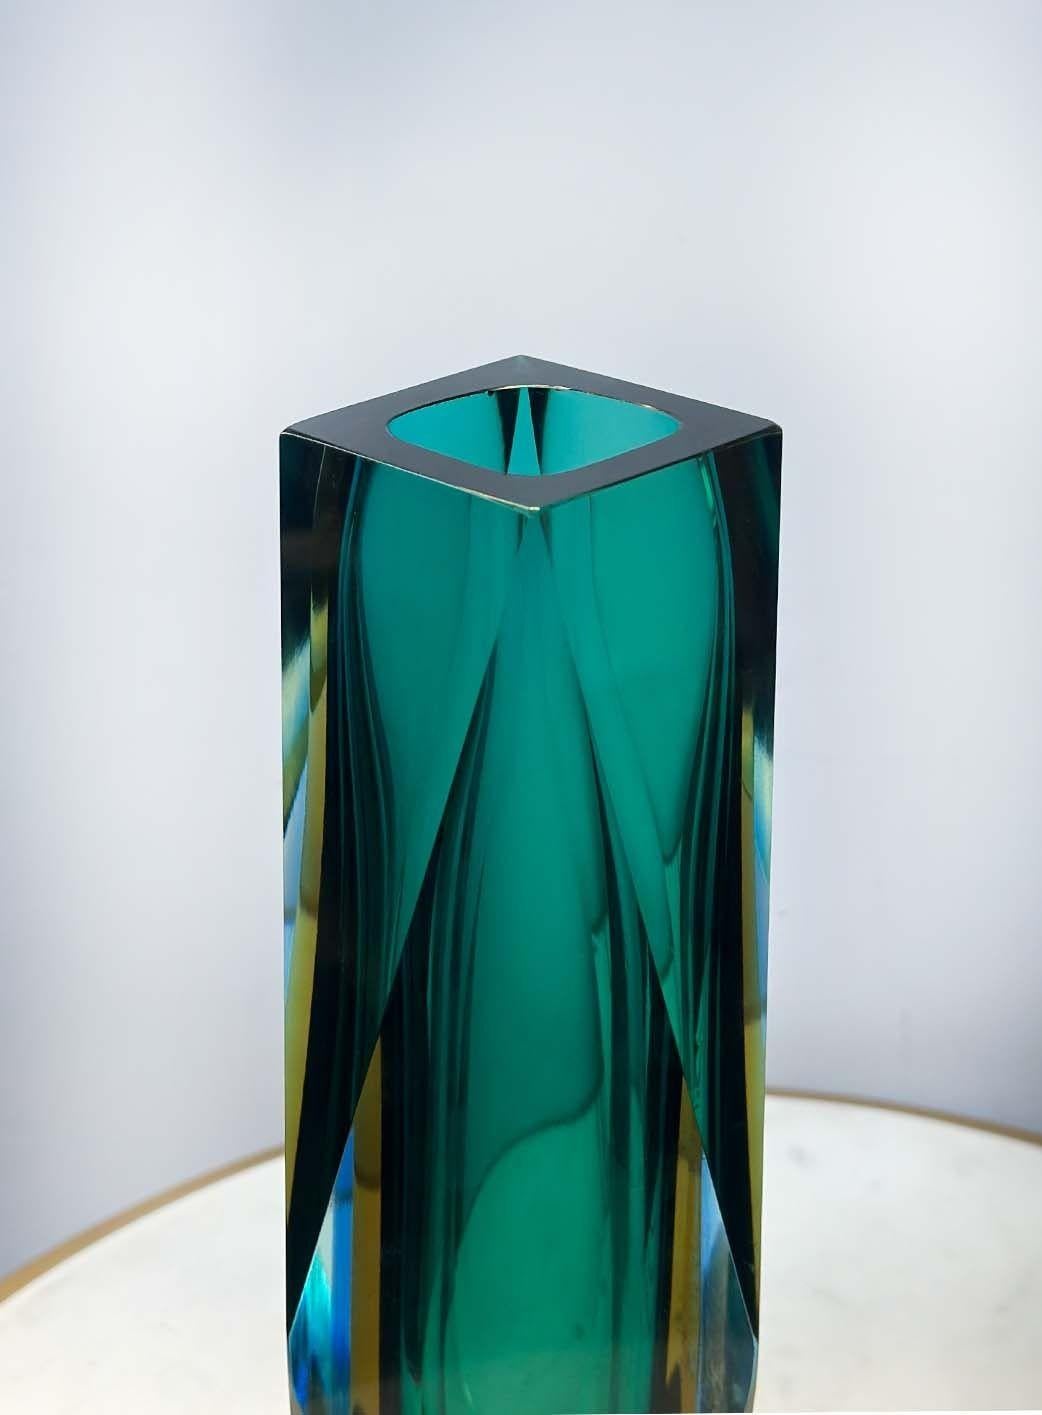 Vintage Italian Murano Glass Vase, c. 1960's In Good Condition For Sale In Los Angeles, CA